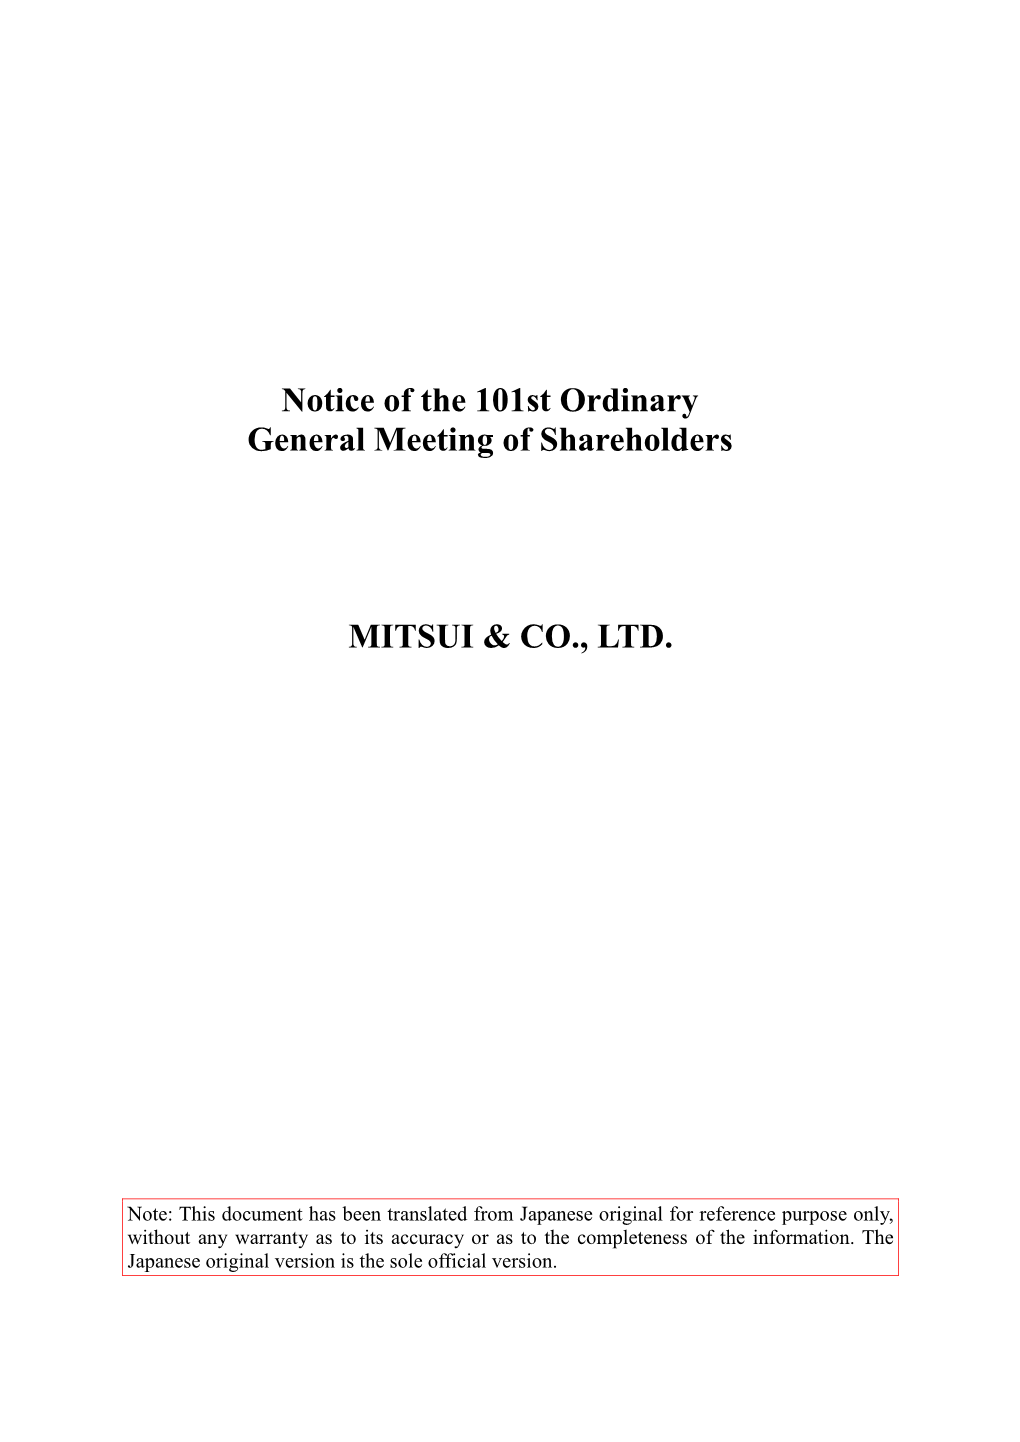 Notice of the 101St Ordinary General Meeting of Shareholders (PDF 2.21MB)